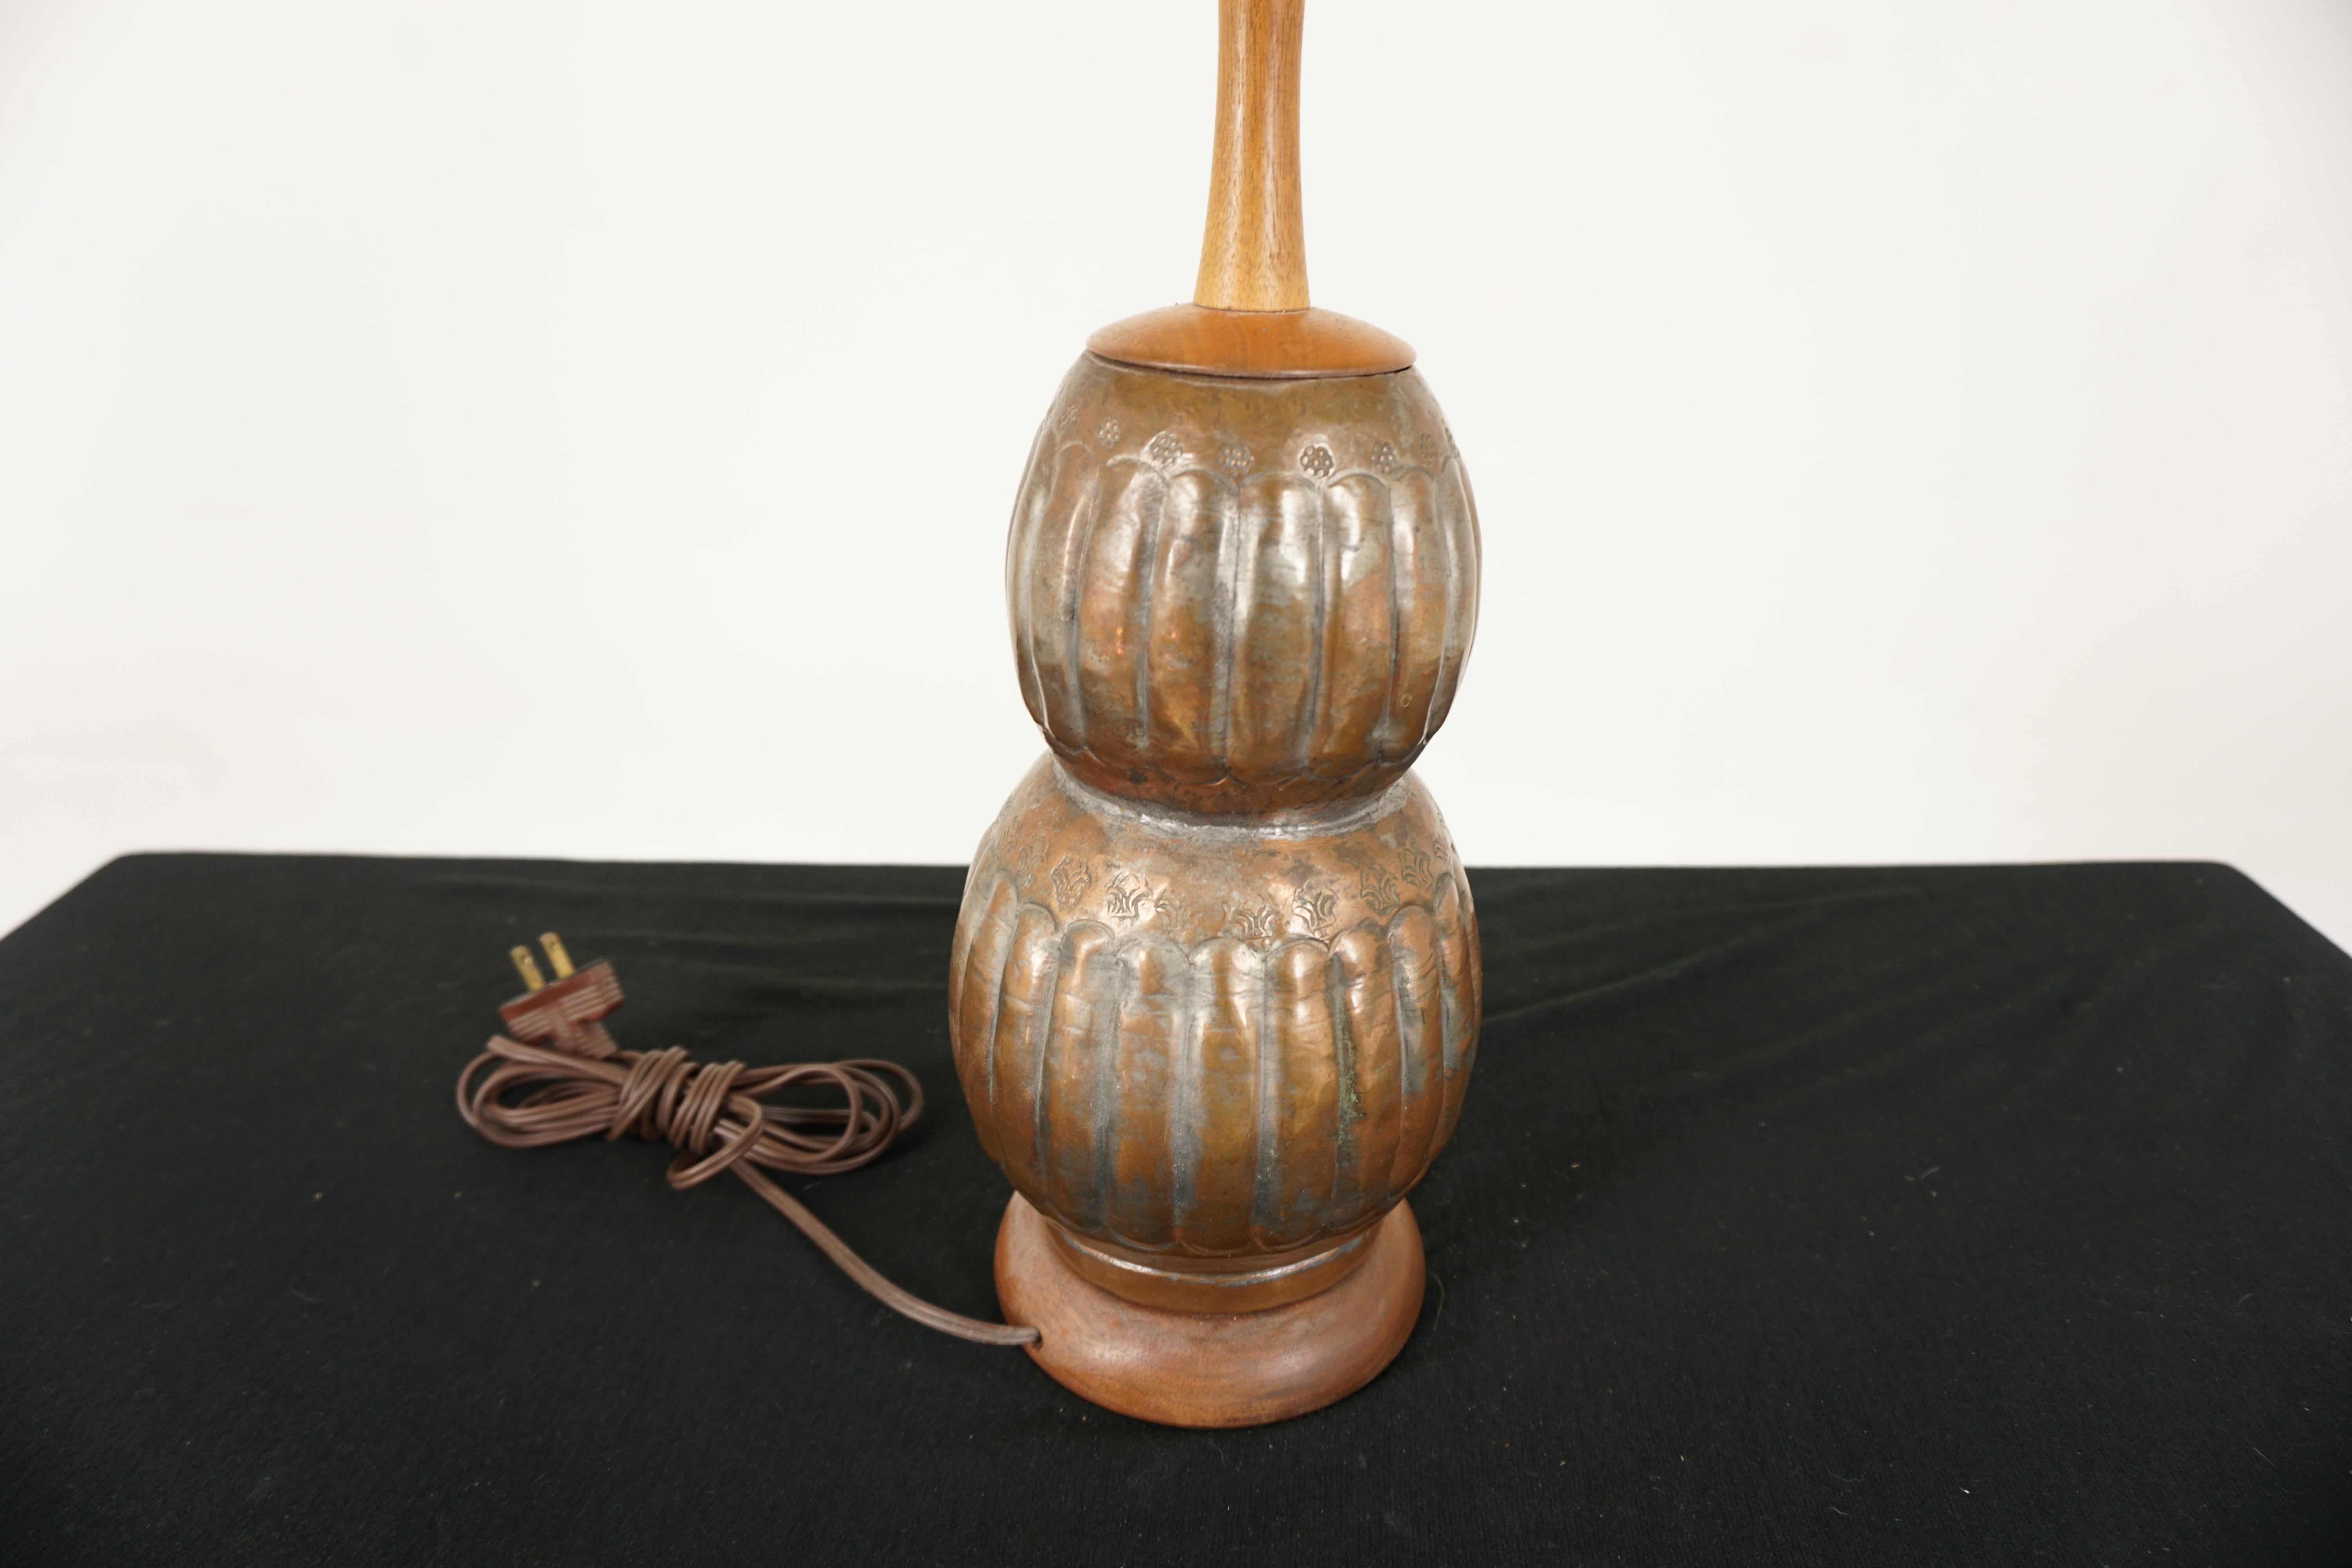 Vintage copper lamp and shade, American 1940, H925

American 1940
Copper and wood
Copper shaped top sitting on wooden base.
Has been electrified.

Measures: 6